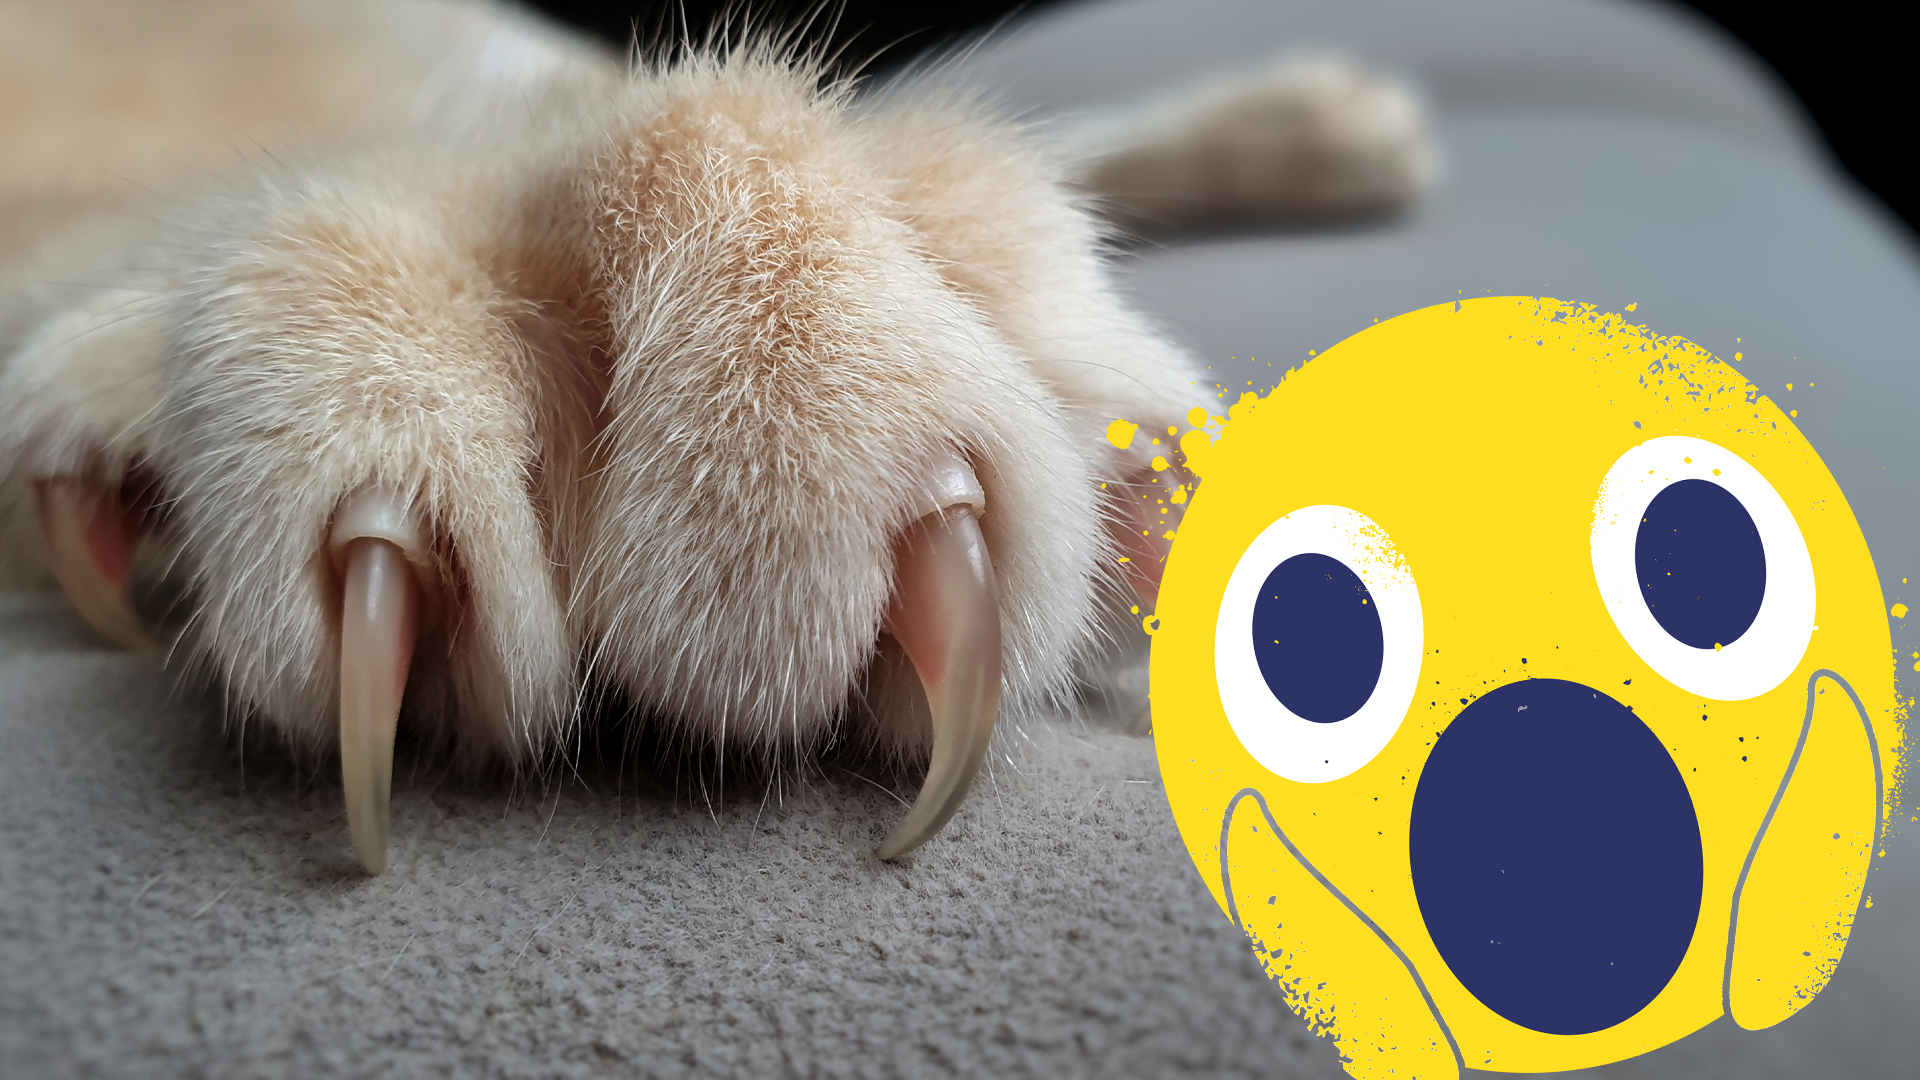 A paw with claws and a shocked emoji